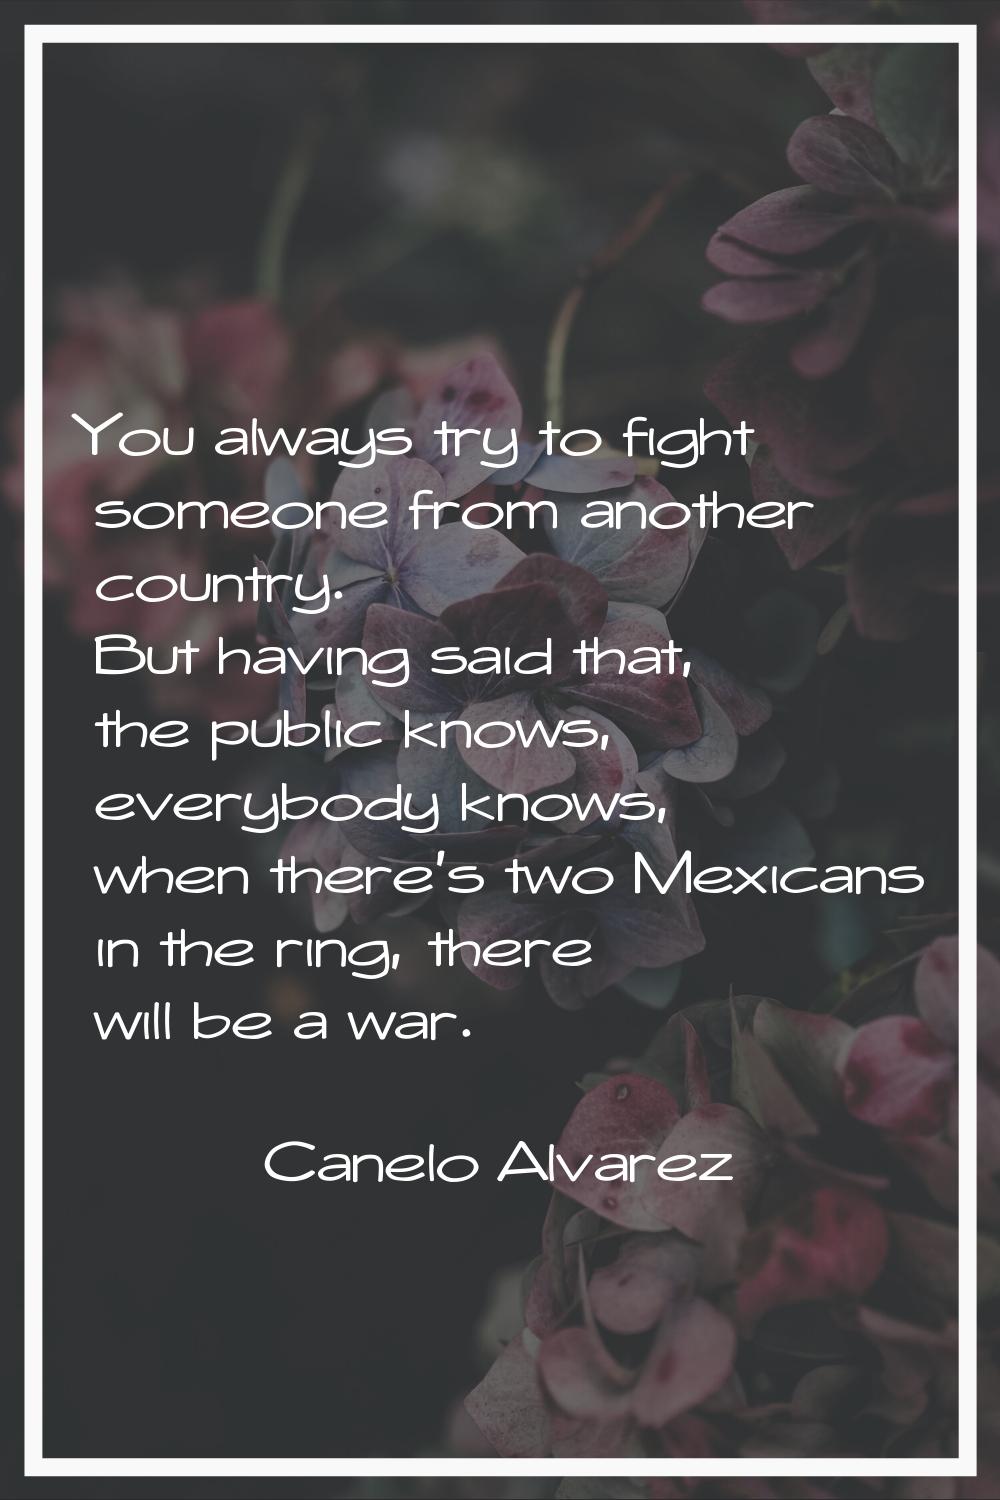 You always try to fight someone from another country. But having said that, the public knows, every